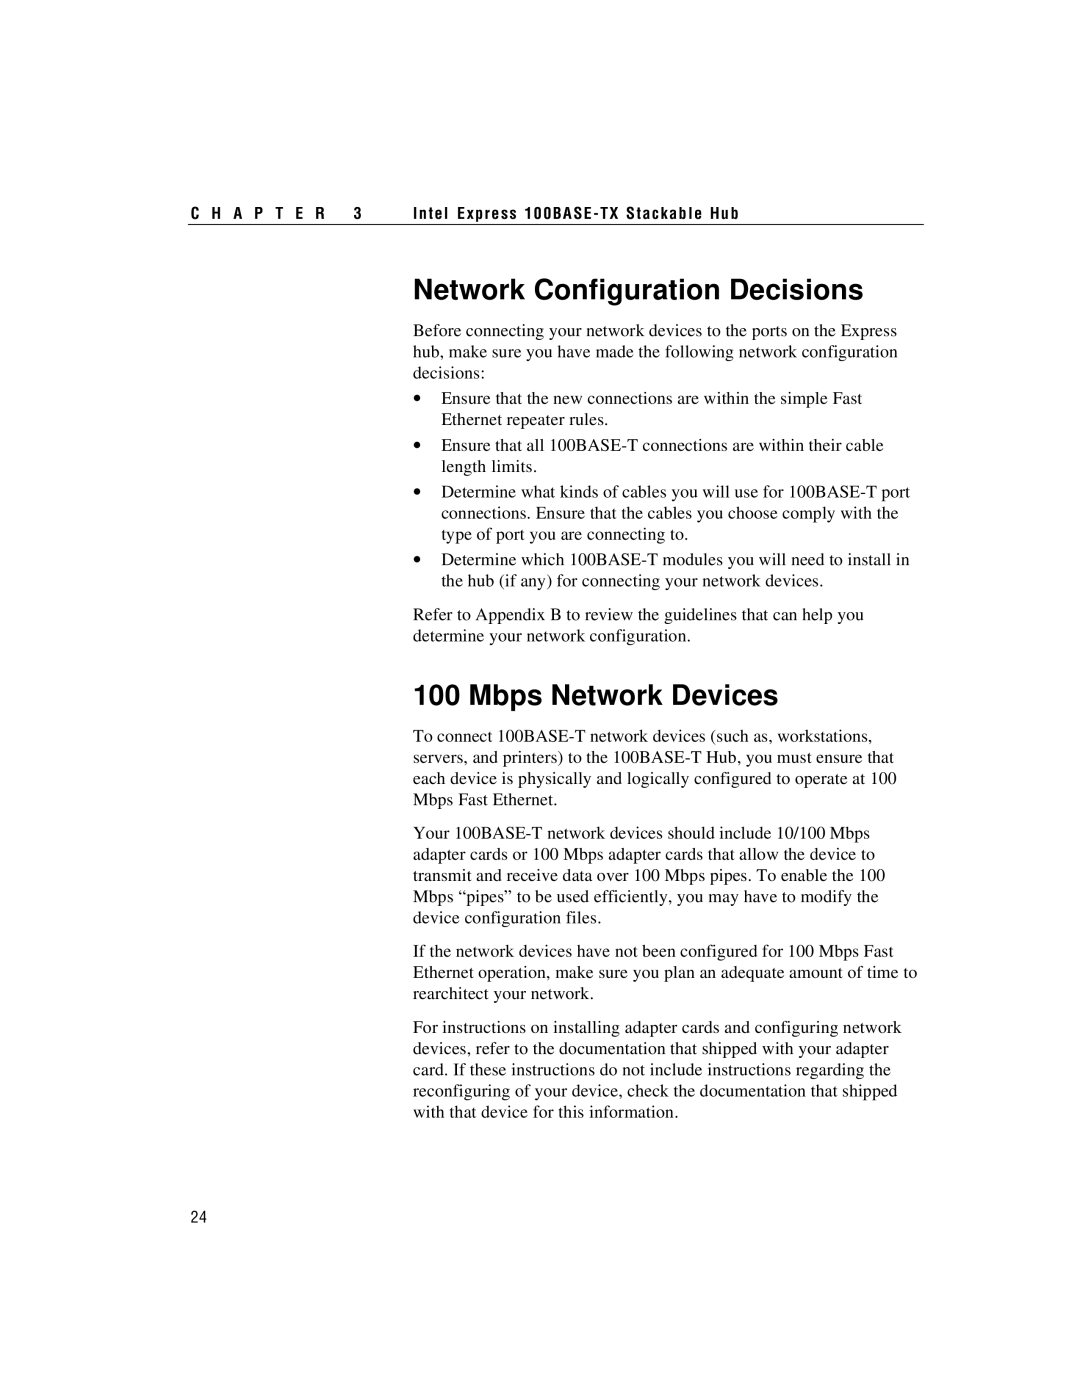 Intel 100BASE-TX manual Network Configuration Decisions, Mbps Network Devices, C H A P T E R 